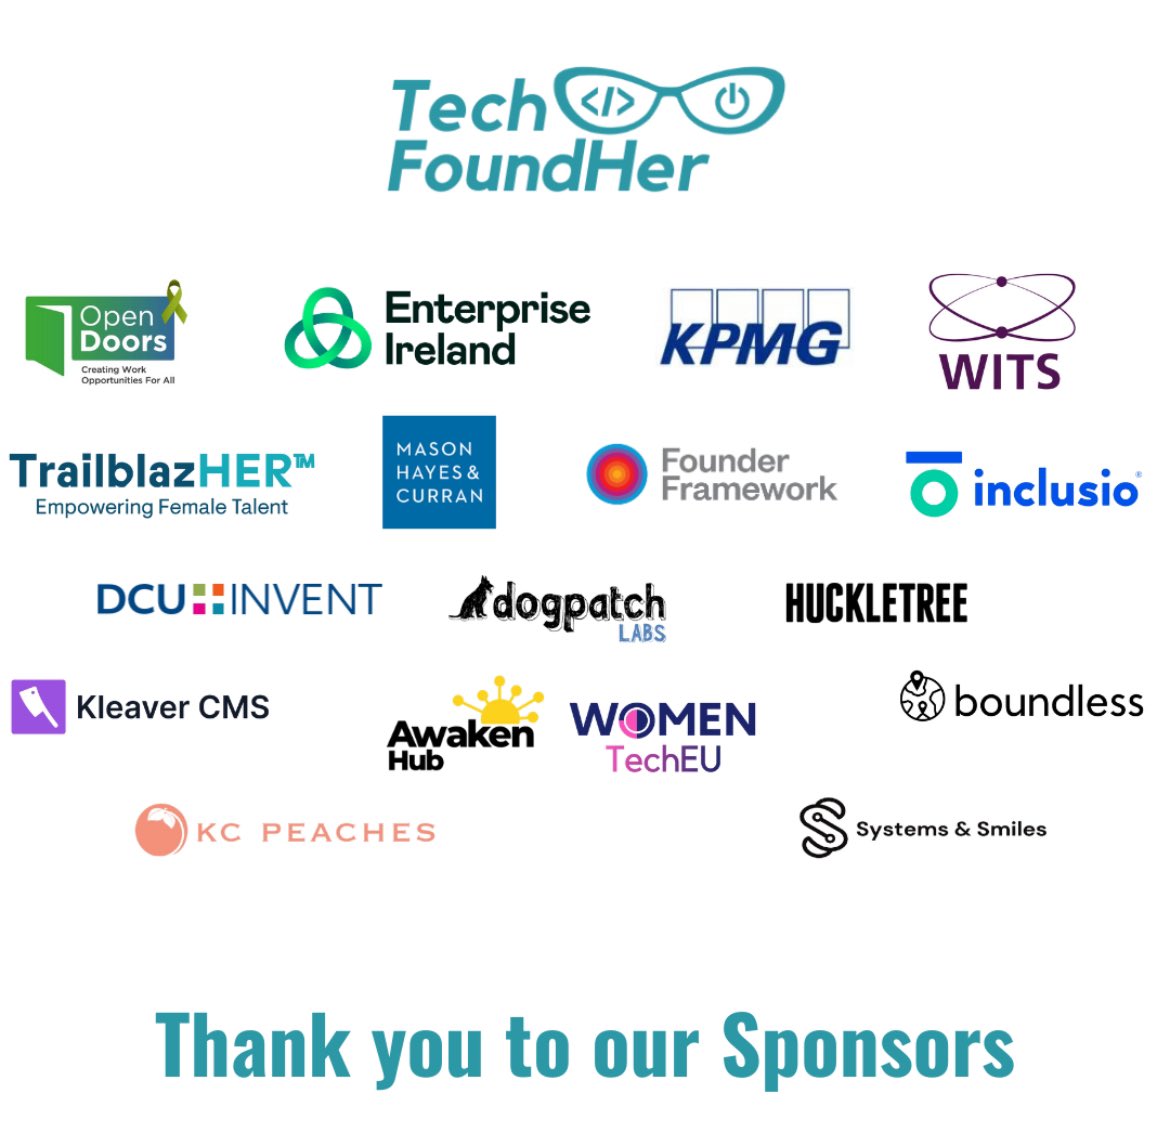 Thank you to all our sponsors who enabled us to make our conference accessible to women from walks of tech life. @KPMG_Ireland @WITSIreland @TrailblazeHer @DCUInvent @Entirl @huckletree @AwakenHub @kcpeaches